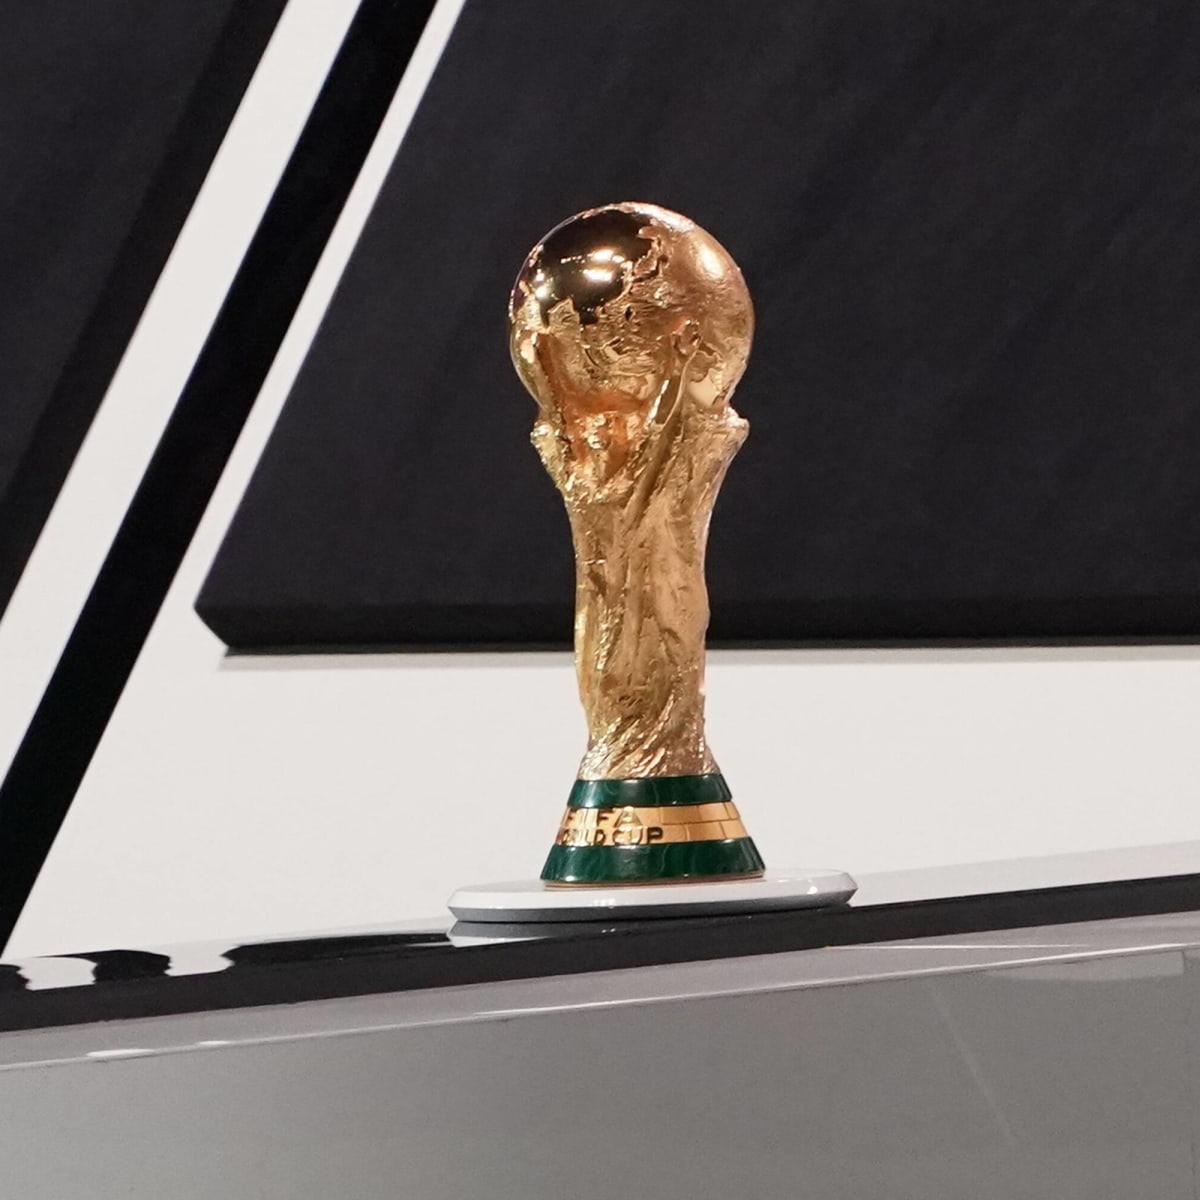 FIFA World Cup prize money explained $440m in Qatar 2022 pot